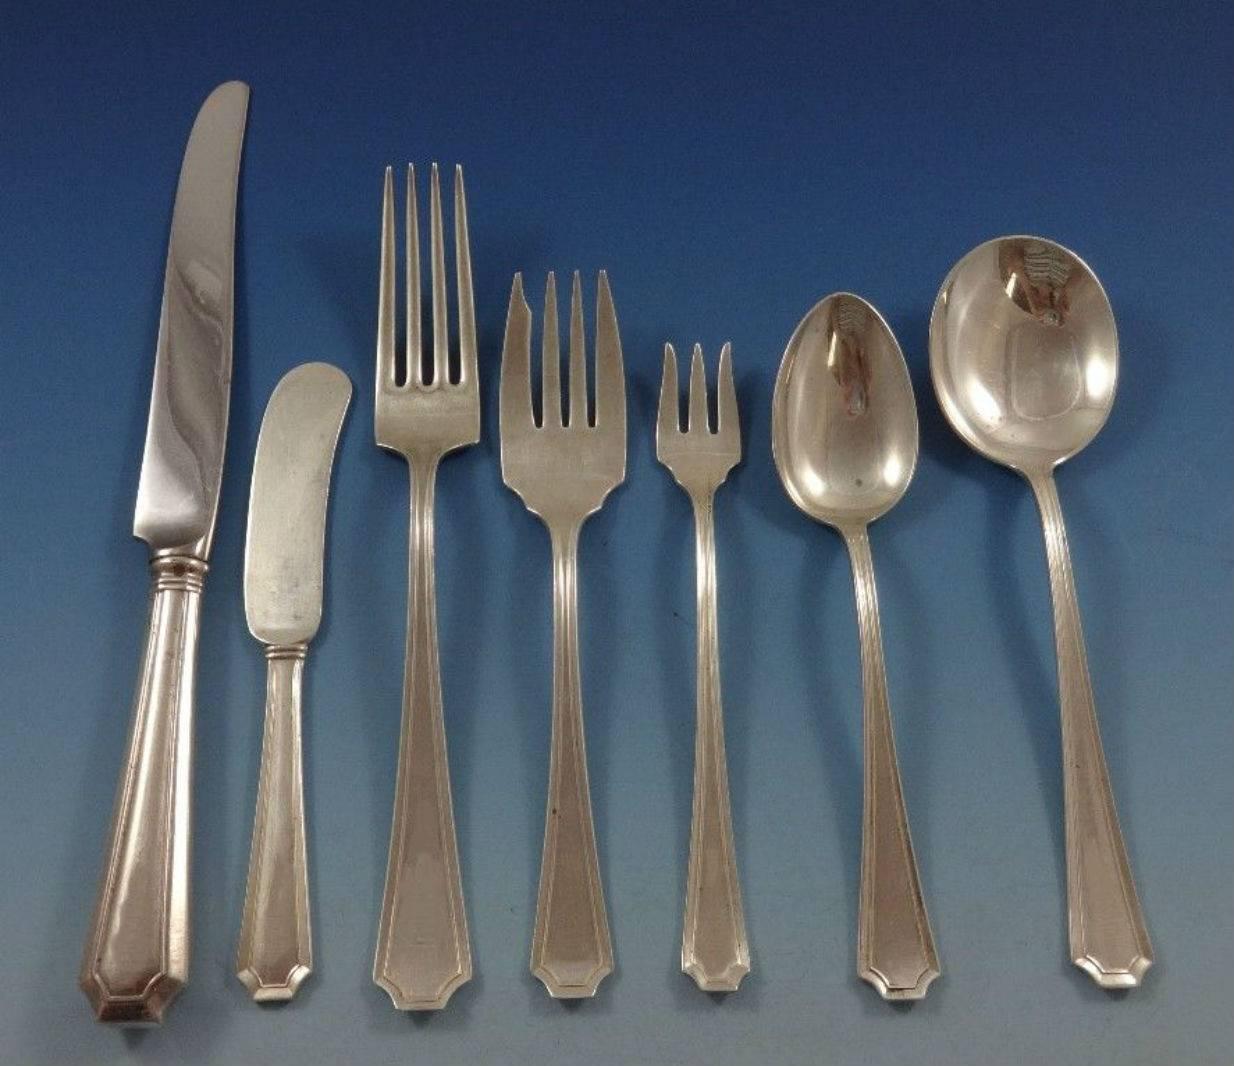 Fairfax by Gorham Sterling Silver Flatware Set For 8 Service 56 Pieces In Excellent Condition For Sale In Big Bend, WI